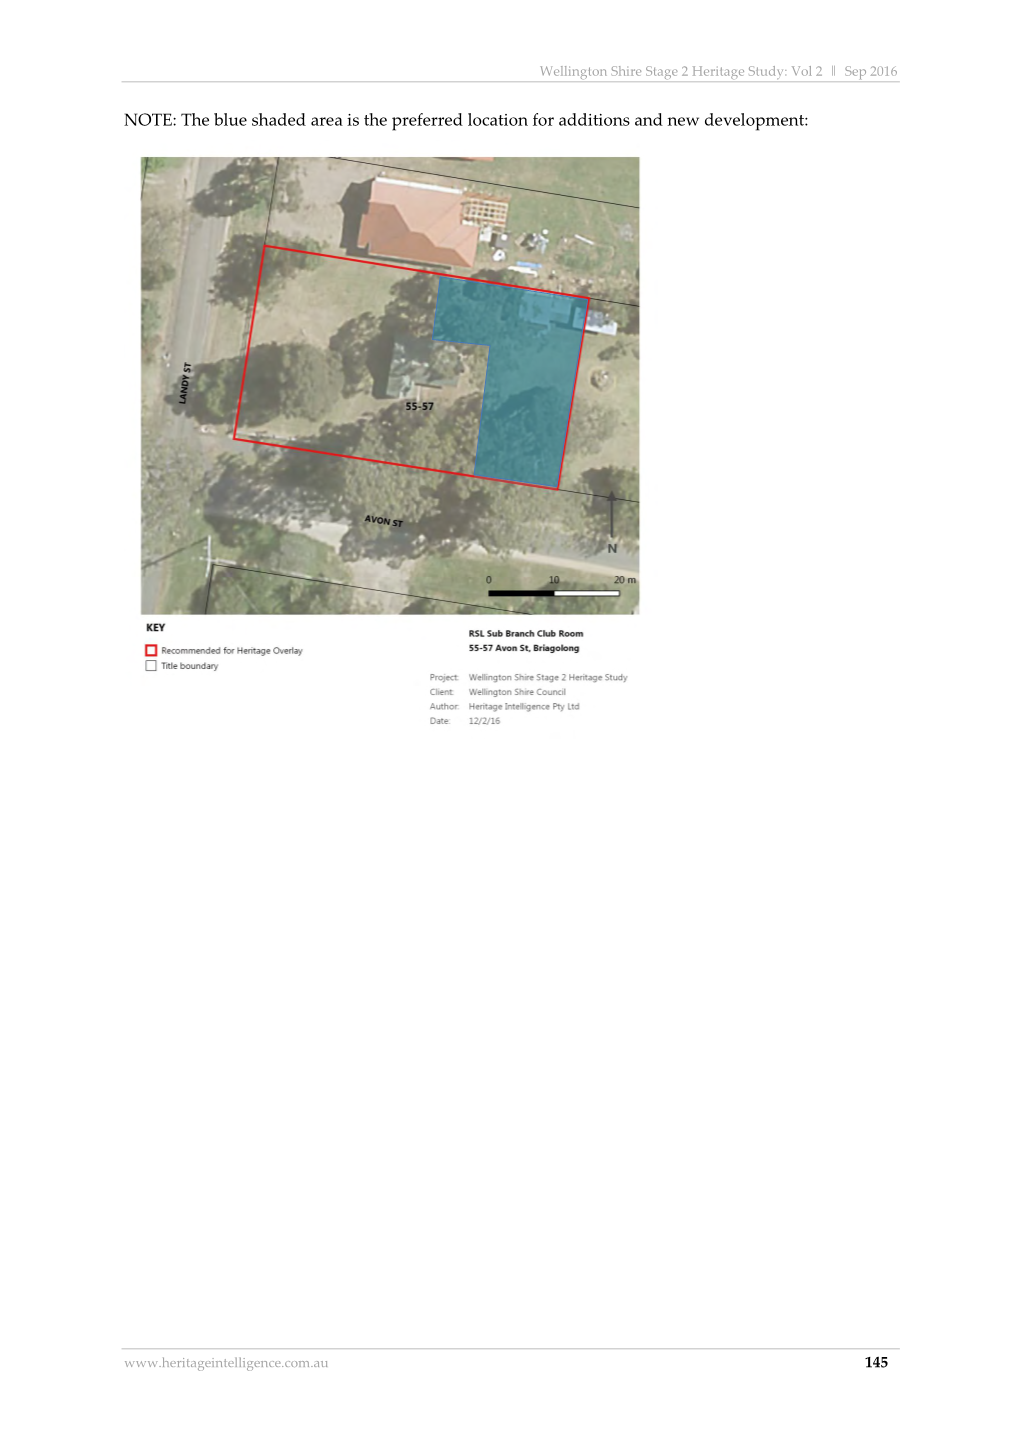 NOTE: the Blue Shaded Area Is the Preferred Location for Additions and New Development